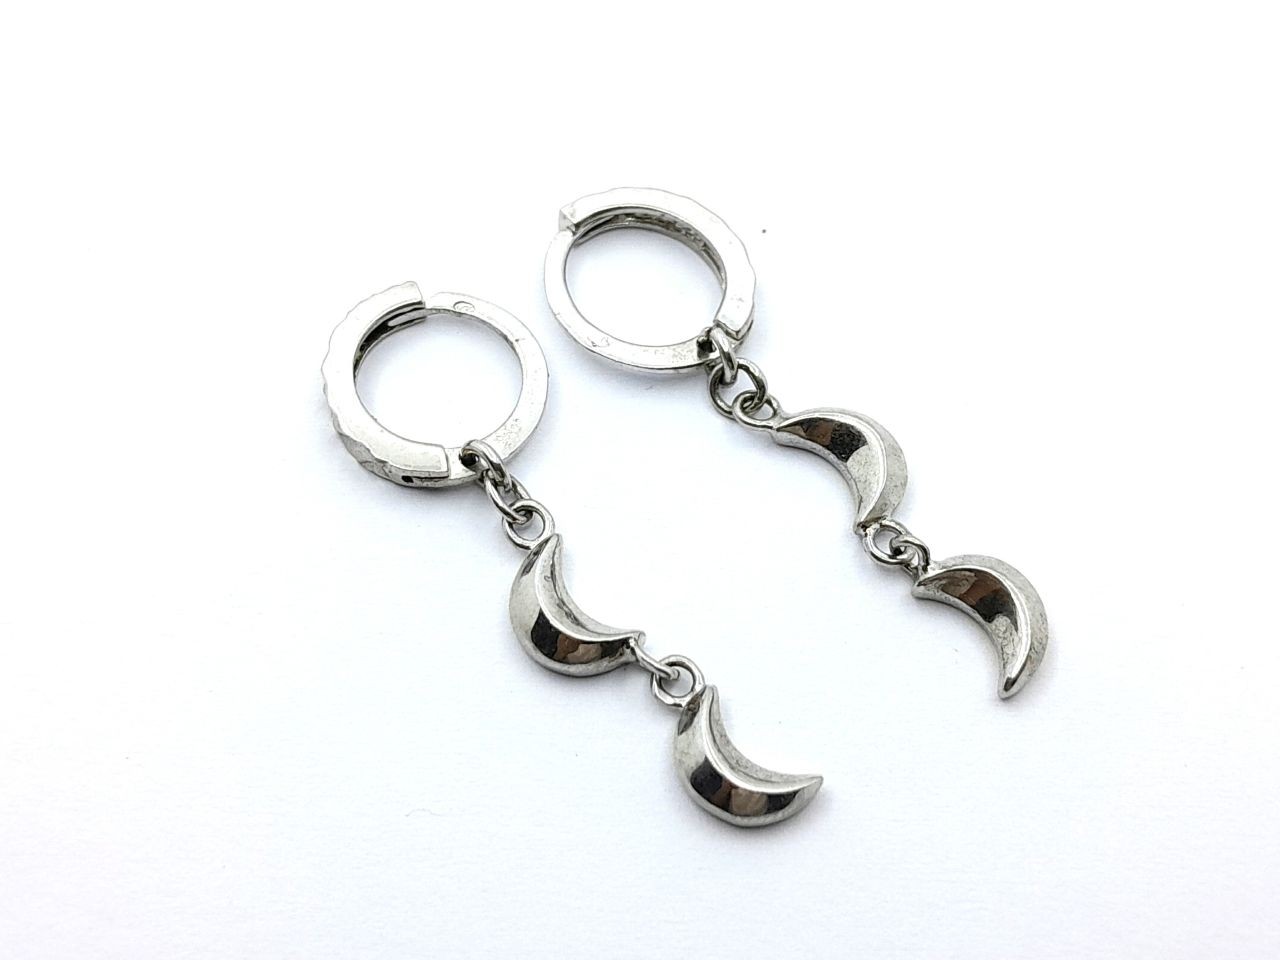 Silver earrings in the shape of a crescent